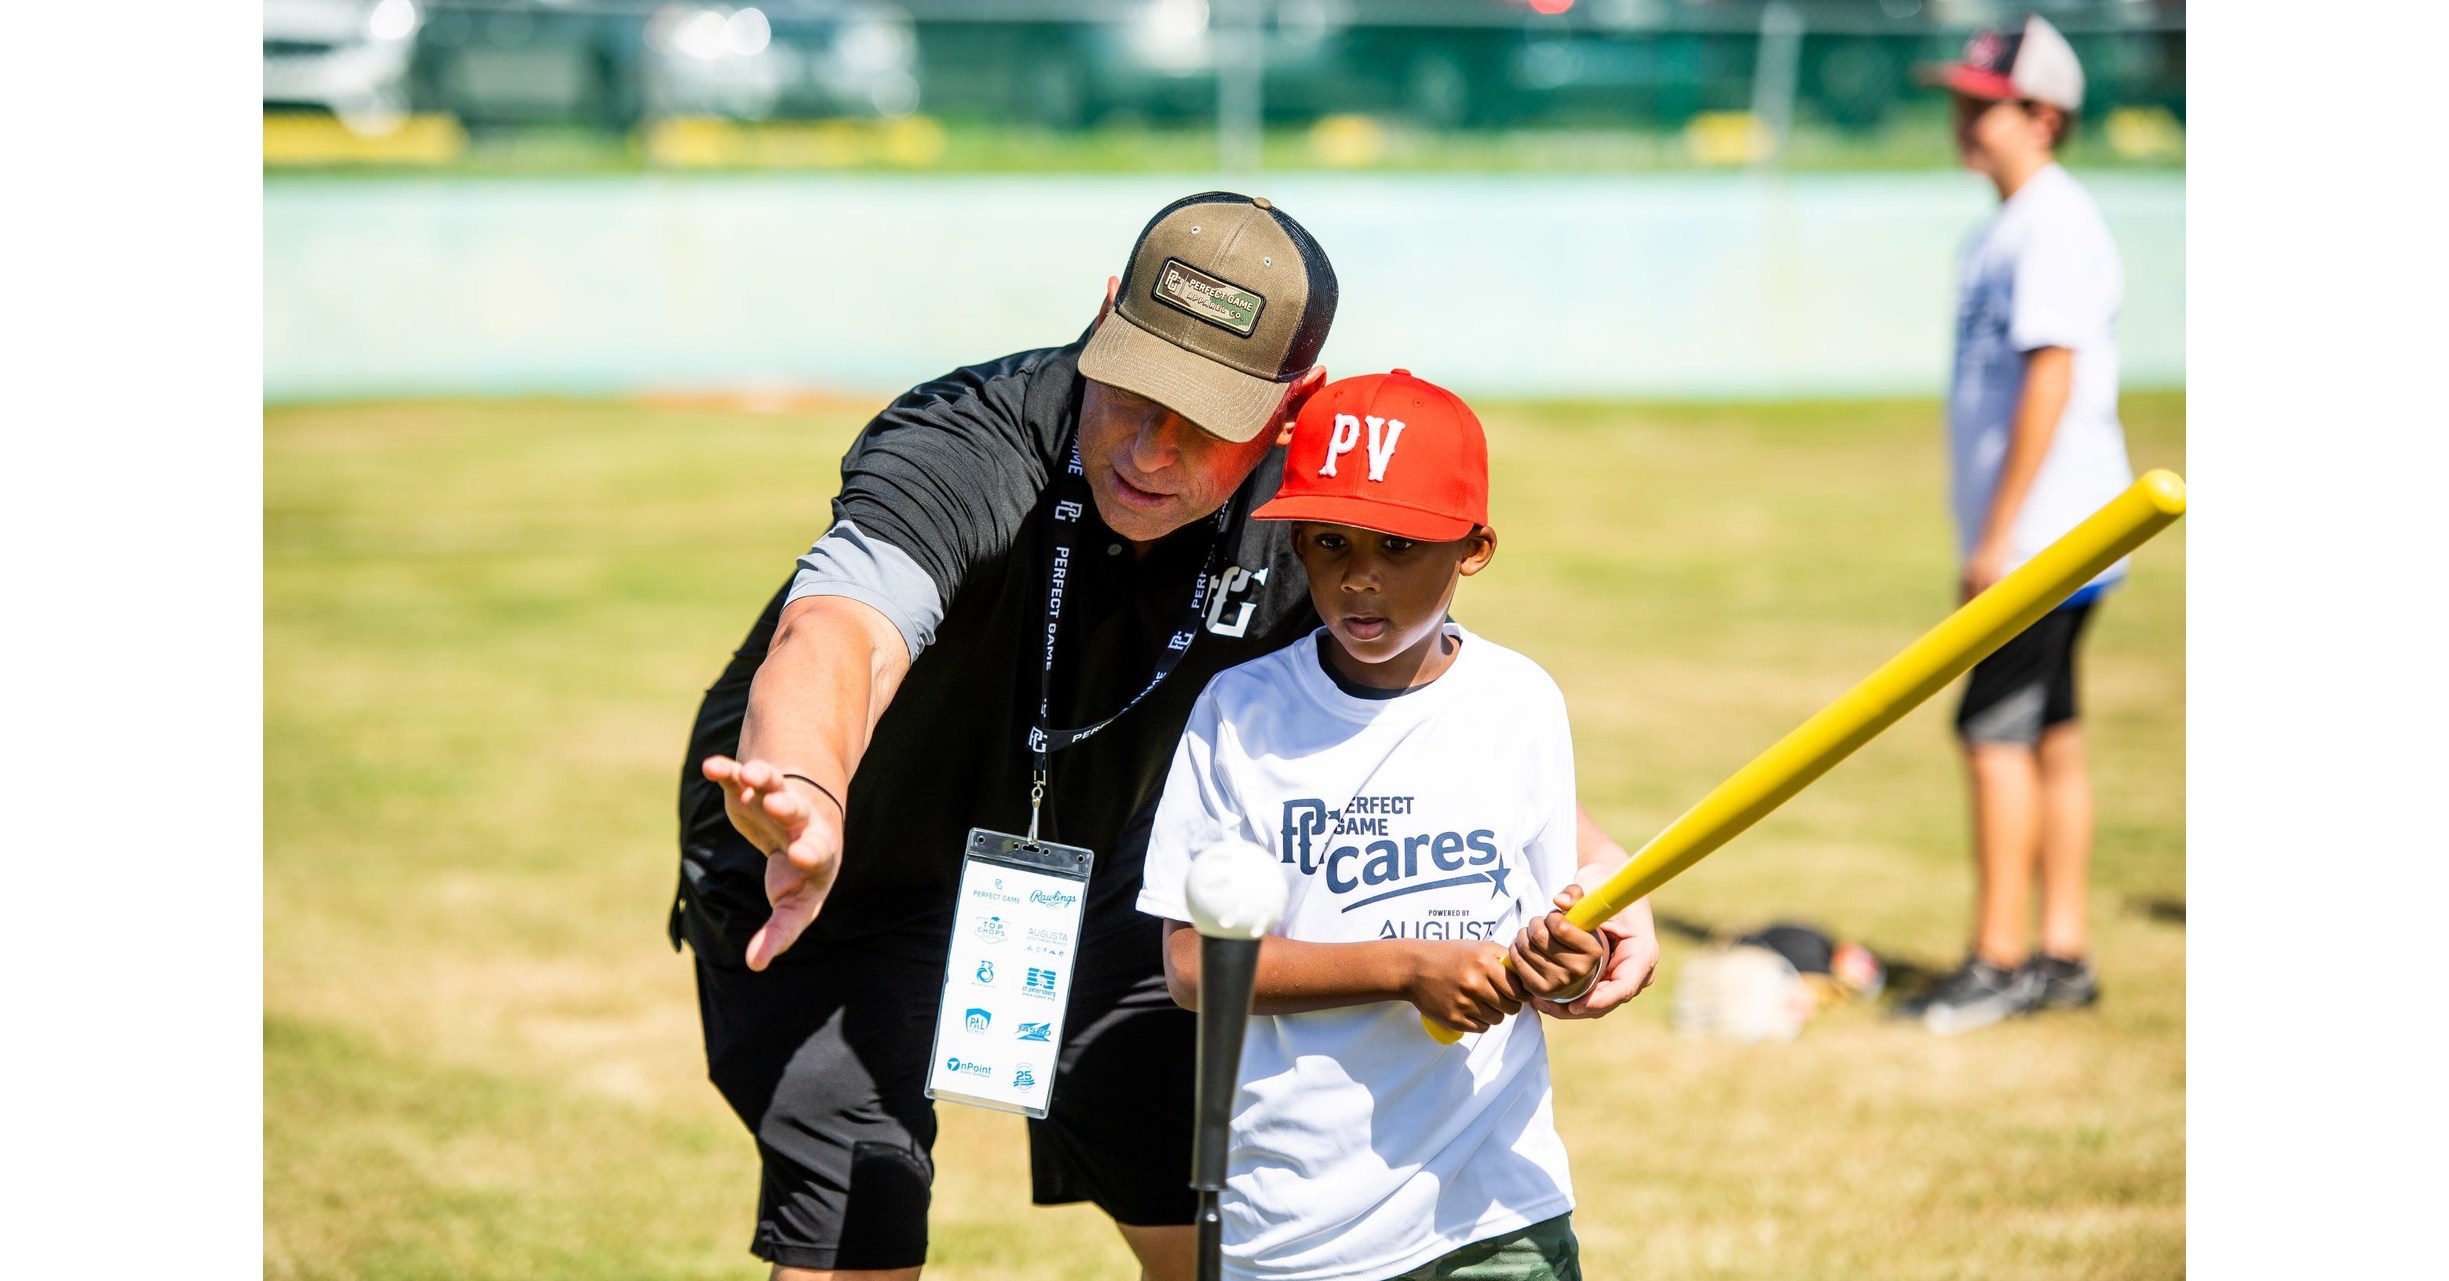 Bo Bichette delivers to St. Petersburg PAL youth program